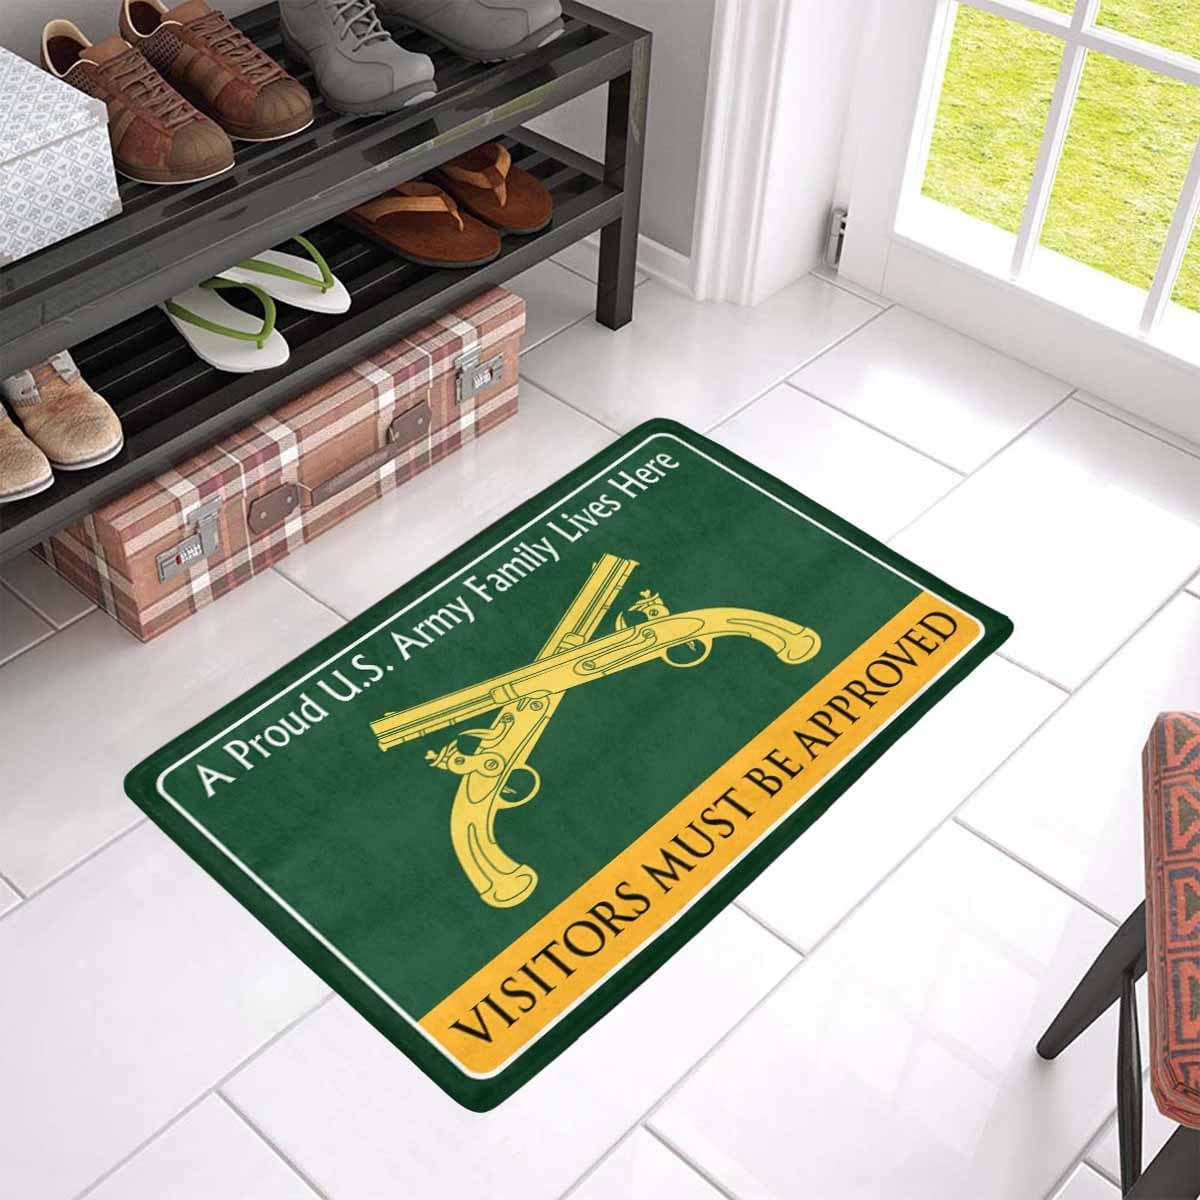 U.S. Army Military Police Corps Family Doormat - Visitors must be approved Doormat (23.6 inches x 15.7 inches)-Doormat-Army-Branch-Veterans Nation